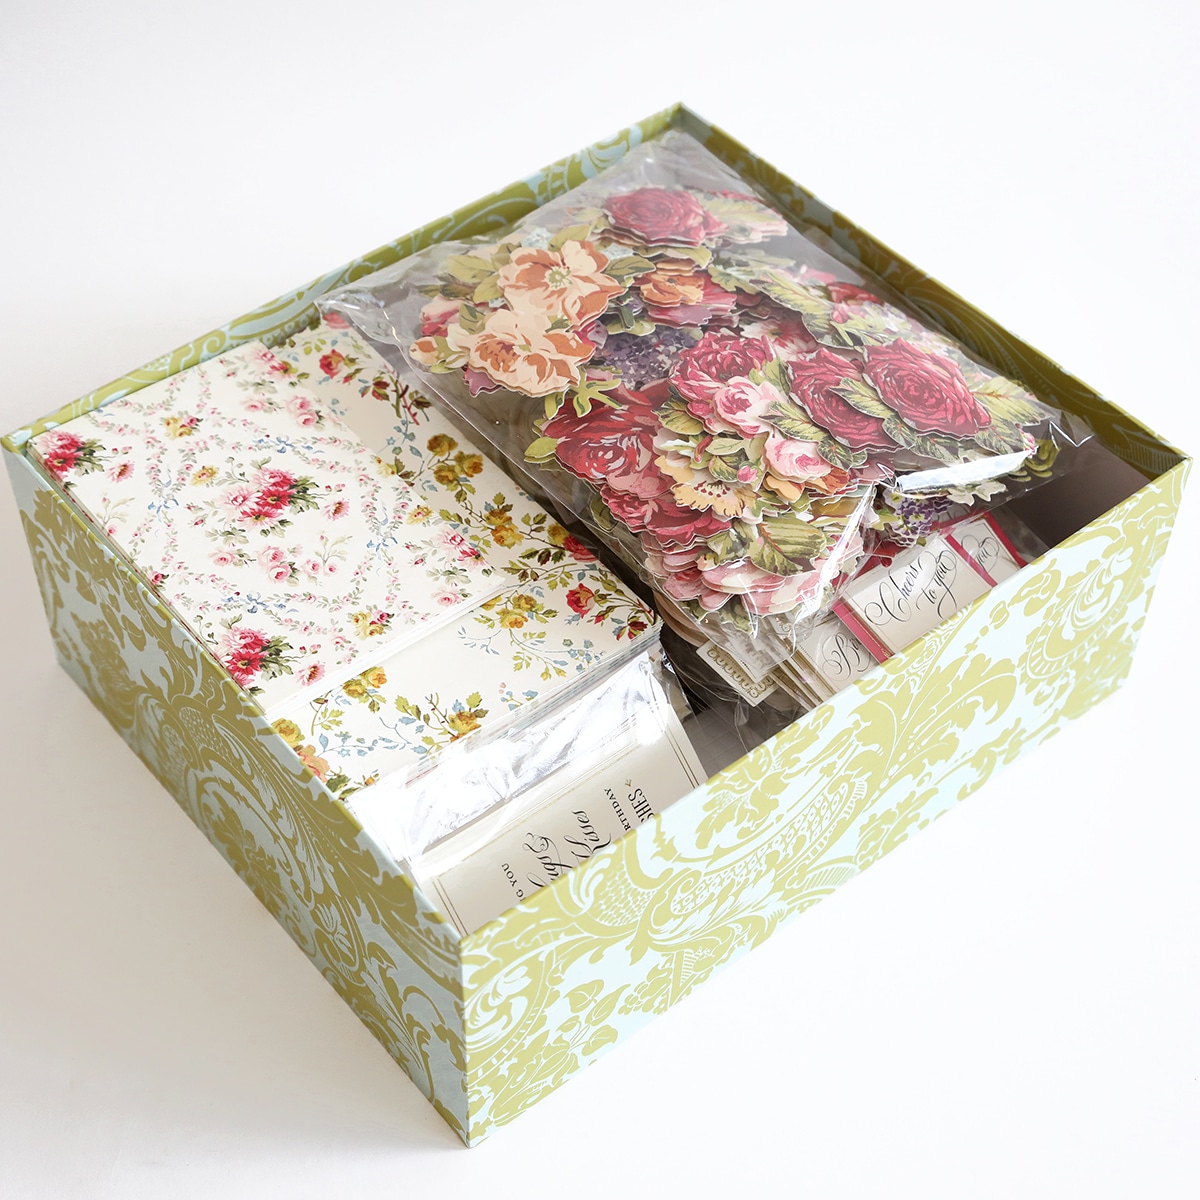 a box filled with flowers and other items.